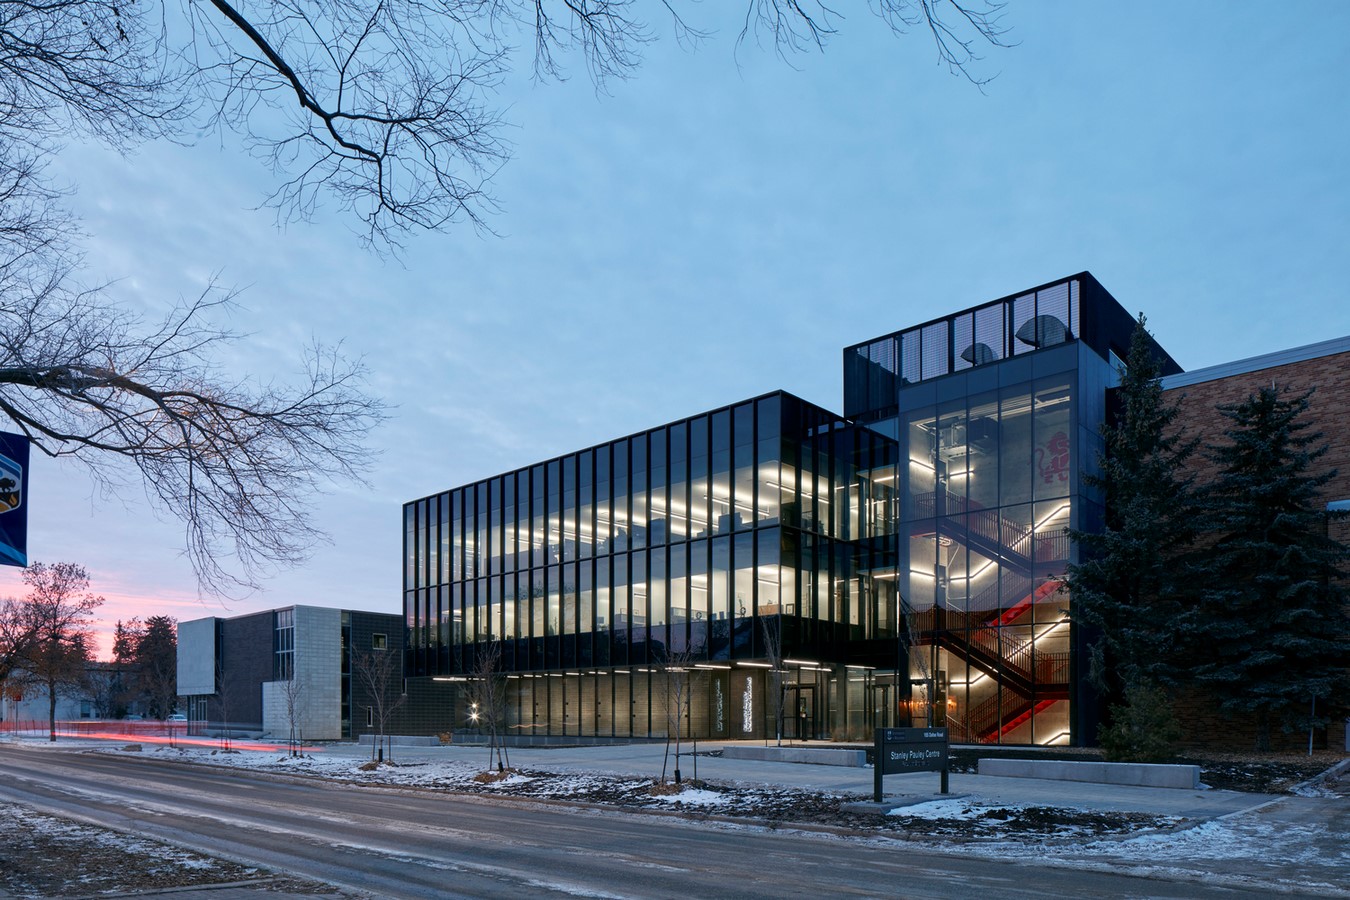 Stanley Pauley Engineering Building by Stantec - Sheet1